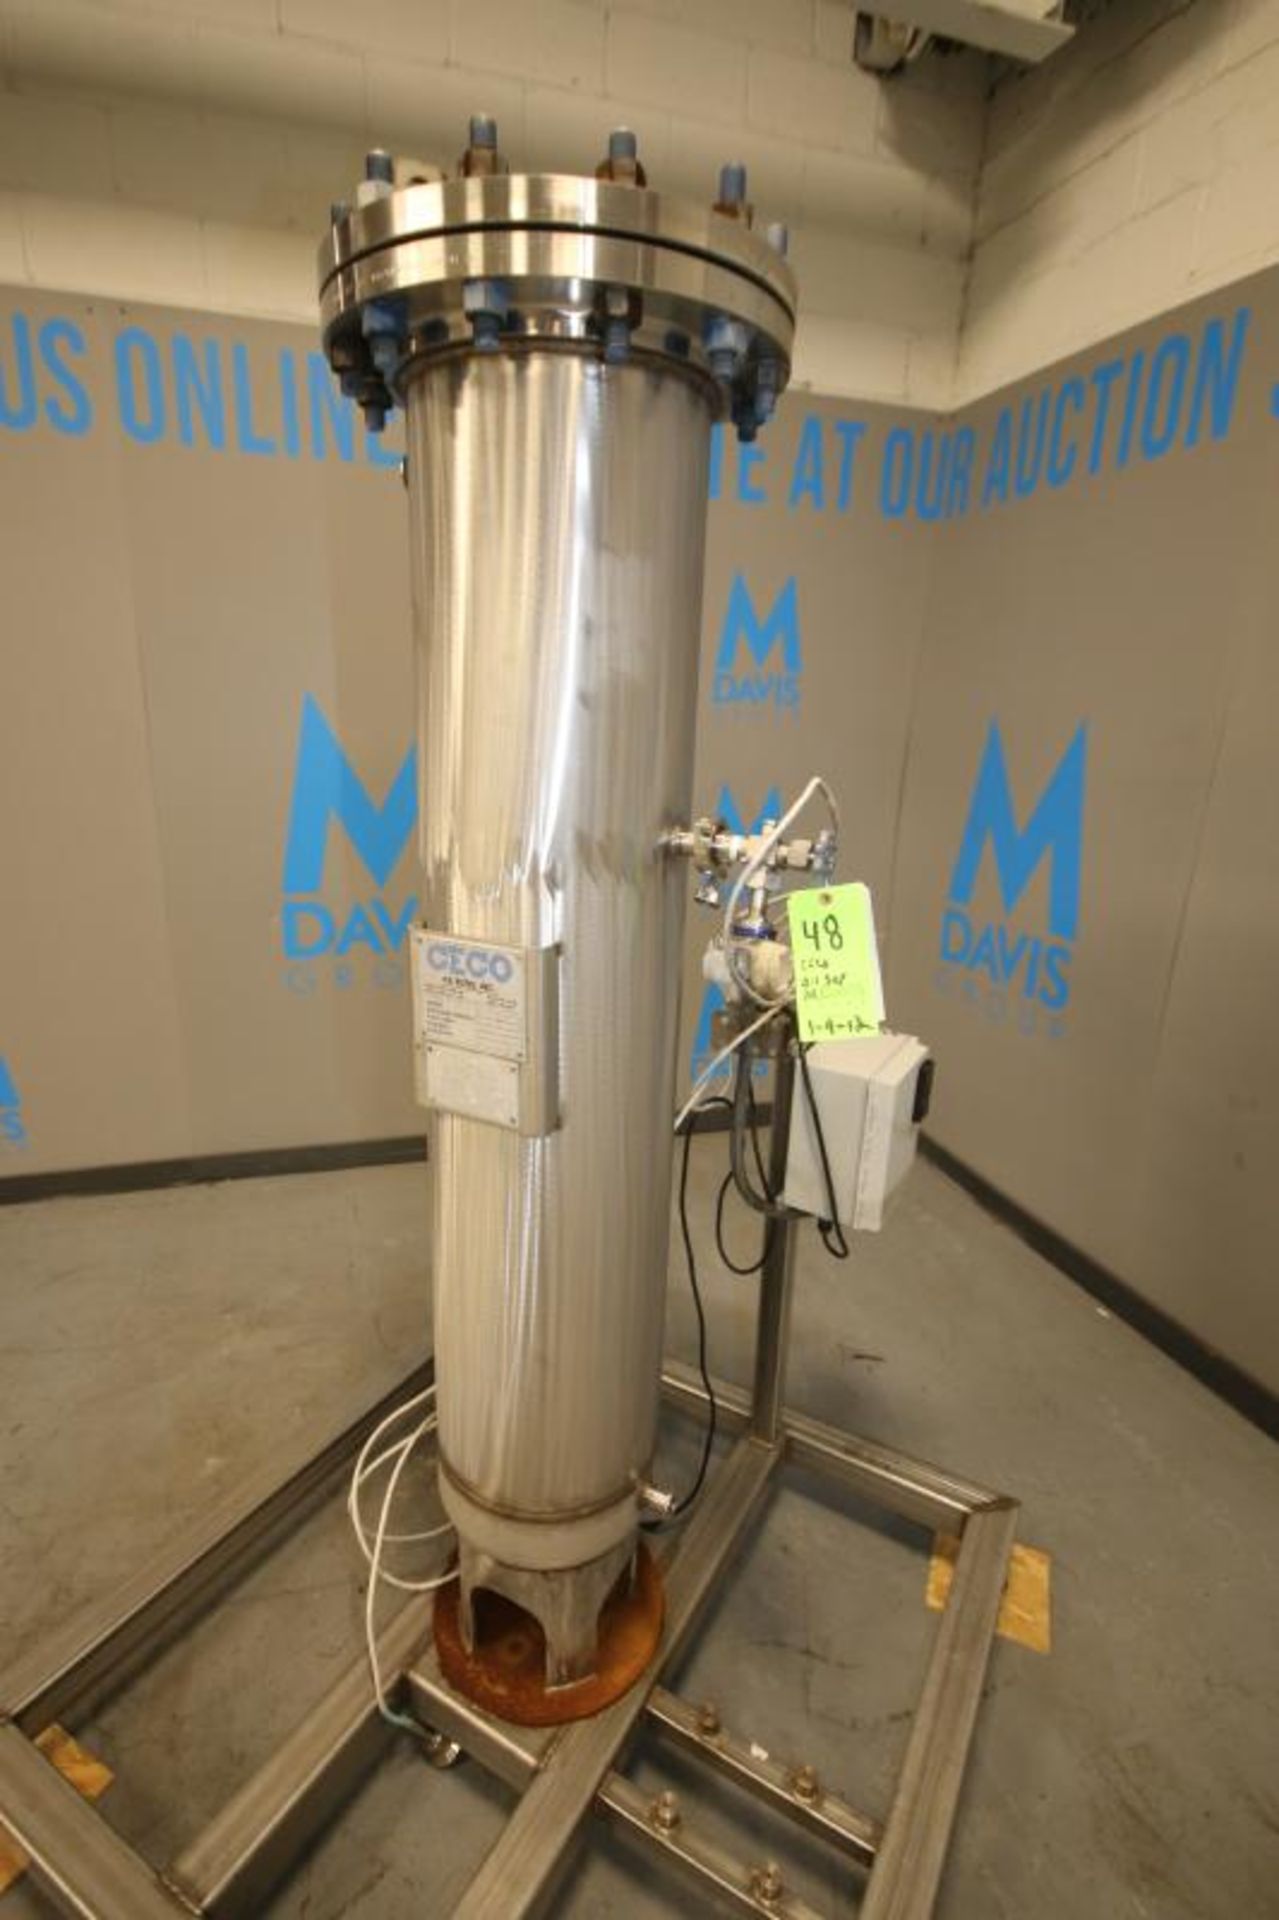 CECO 5 ft H x 12" W S/S Oil Separator / Filter System, Order No. 134263 Rev.O, BN 830, MAWP 75 - Image 2 of 5